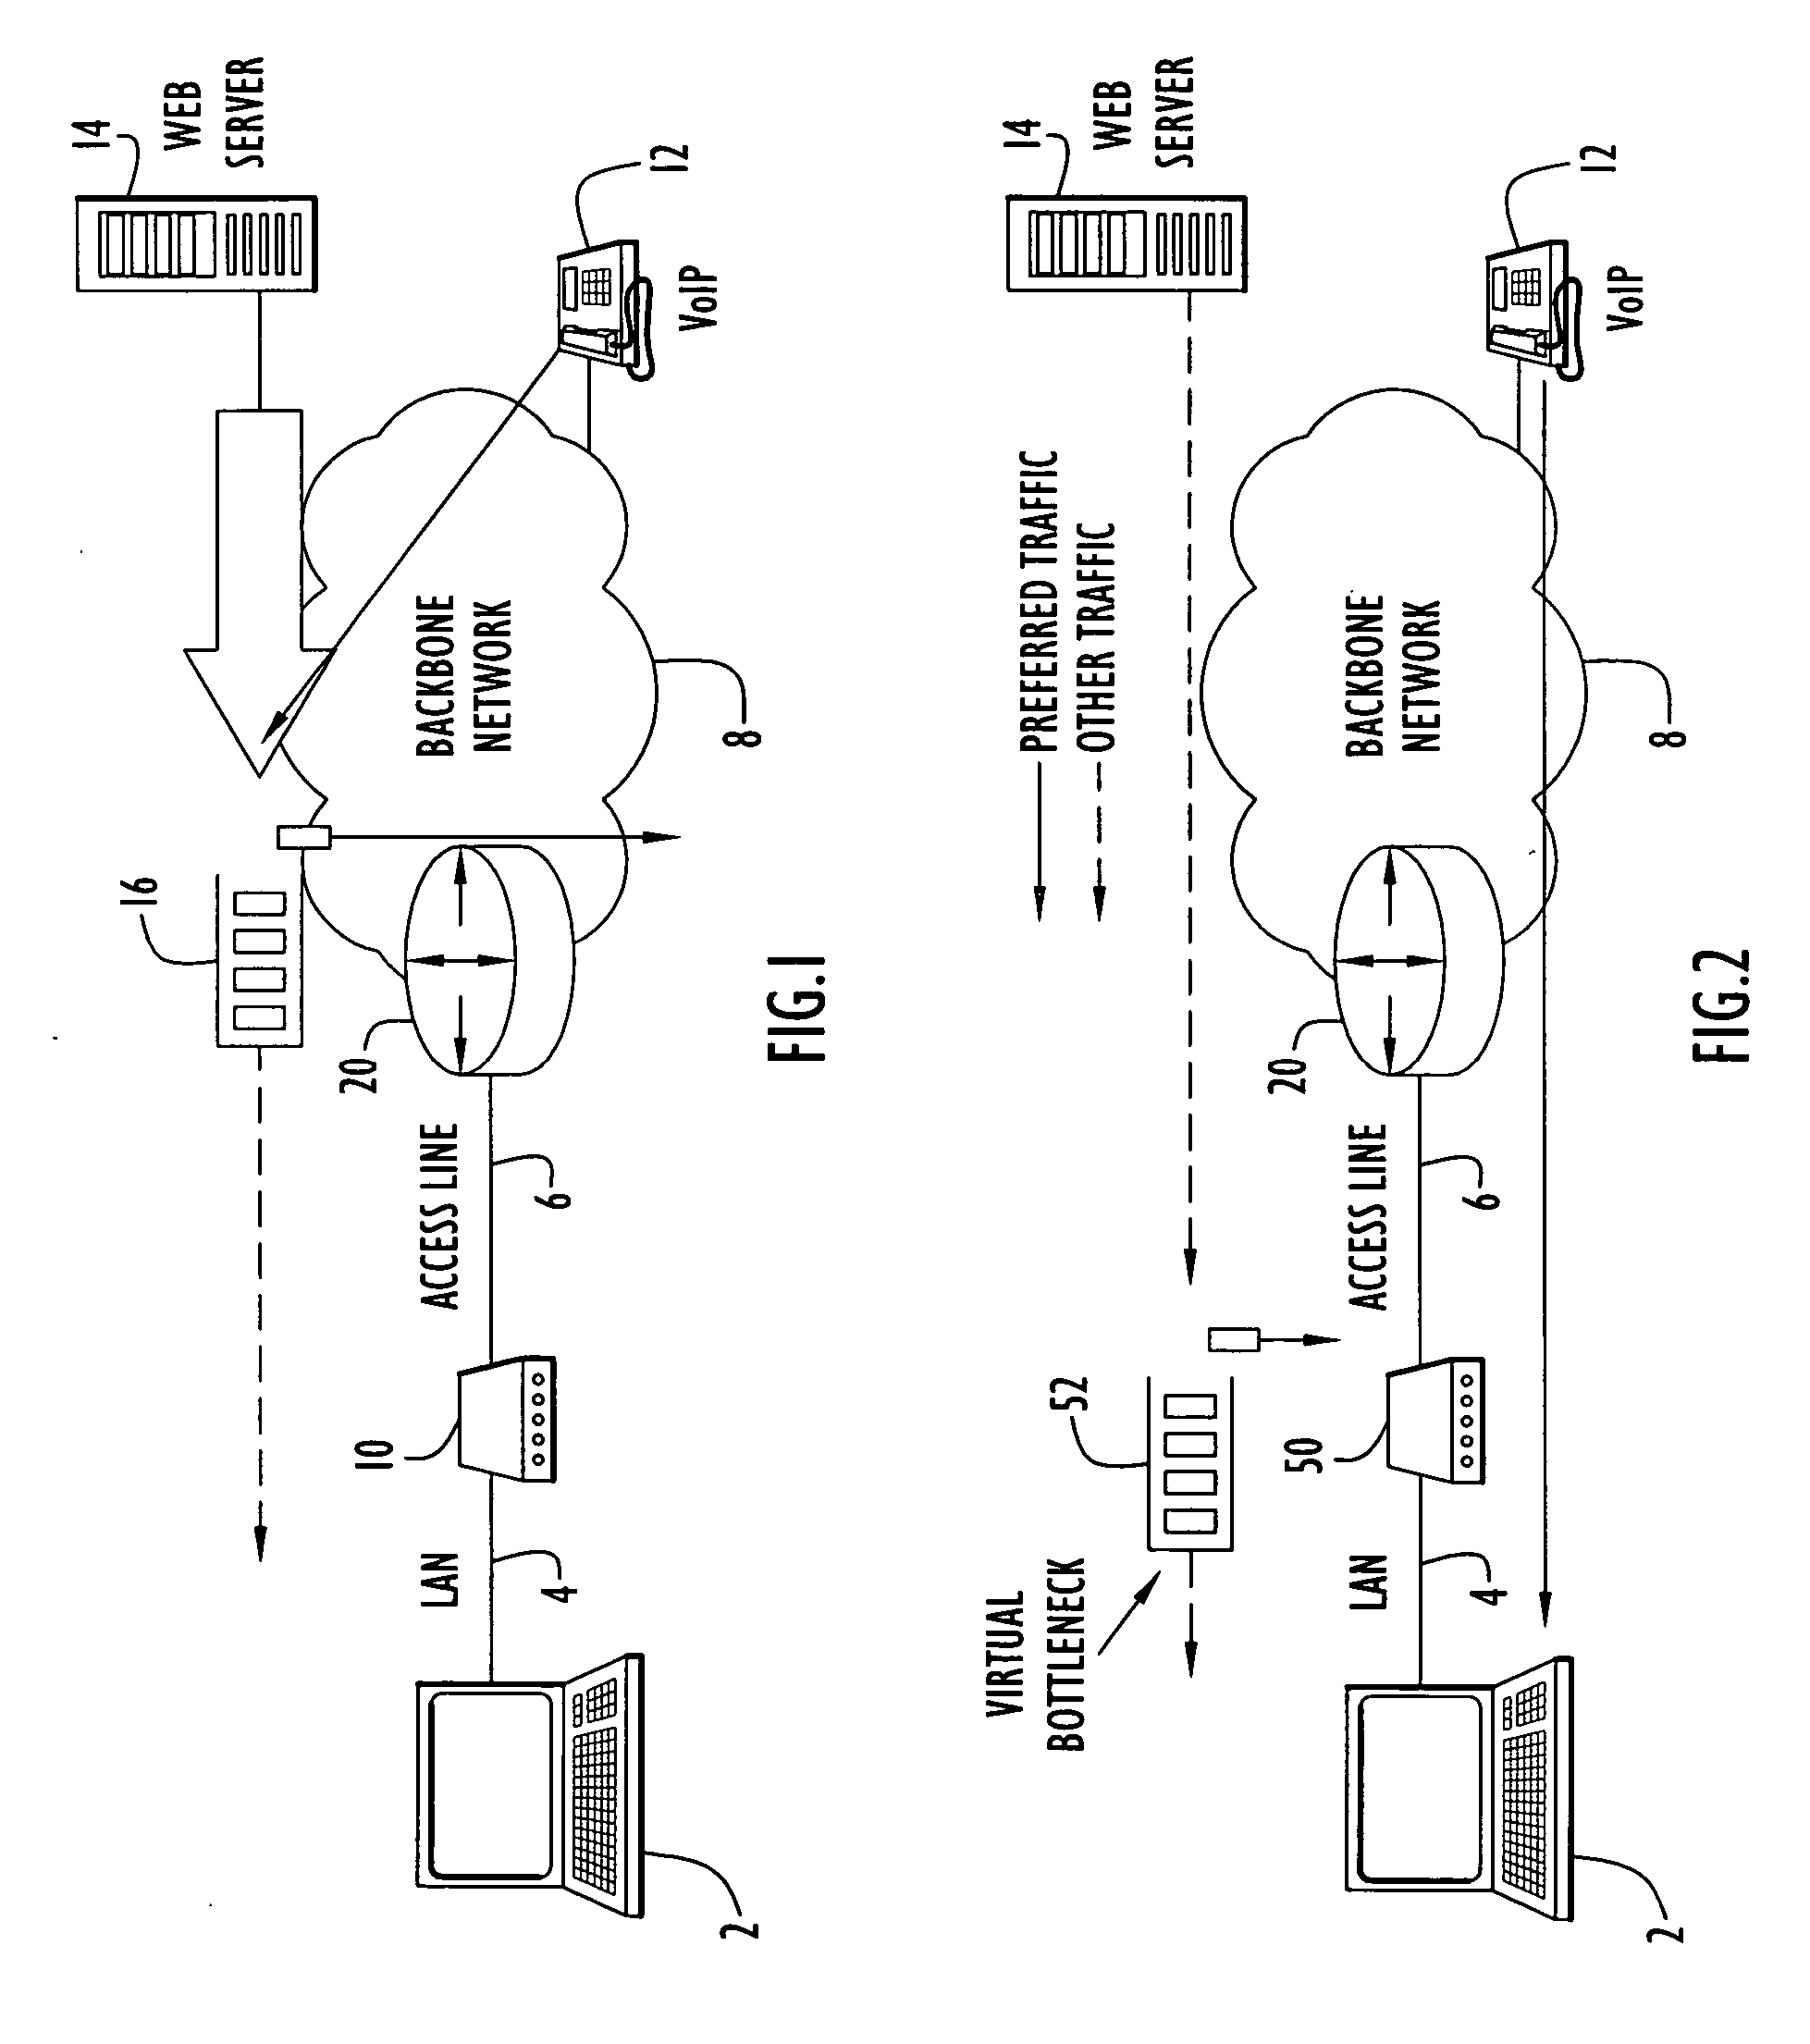 Communication device and method of prioritizing transference of time-critical data